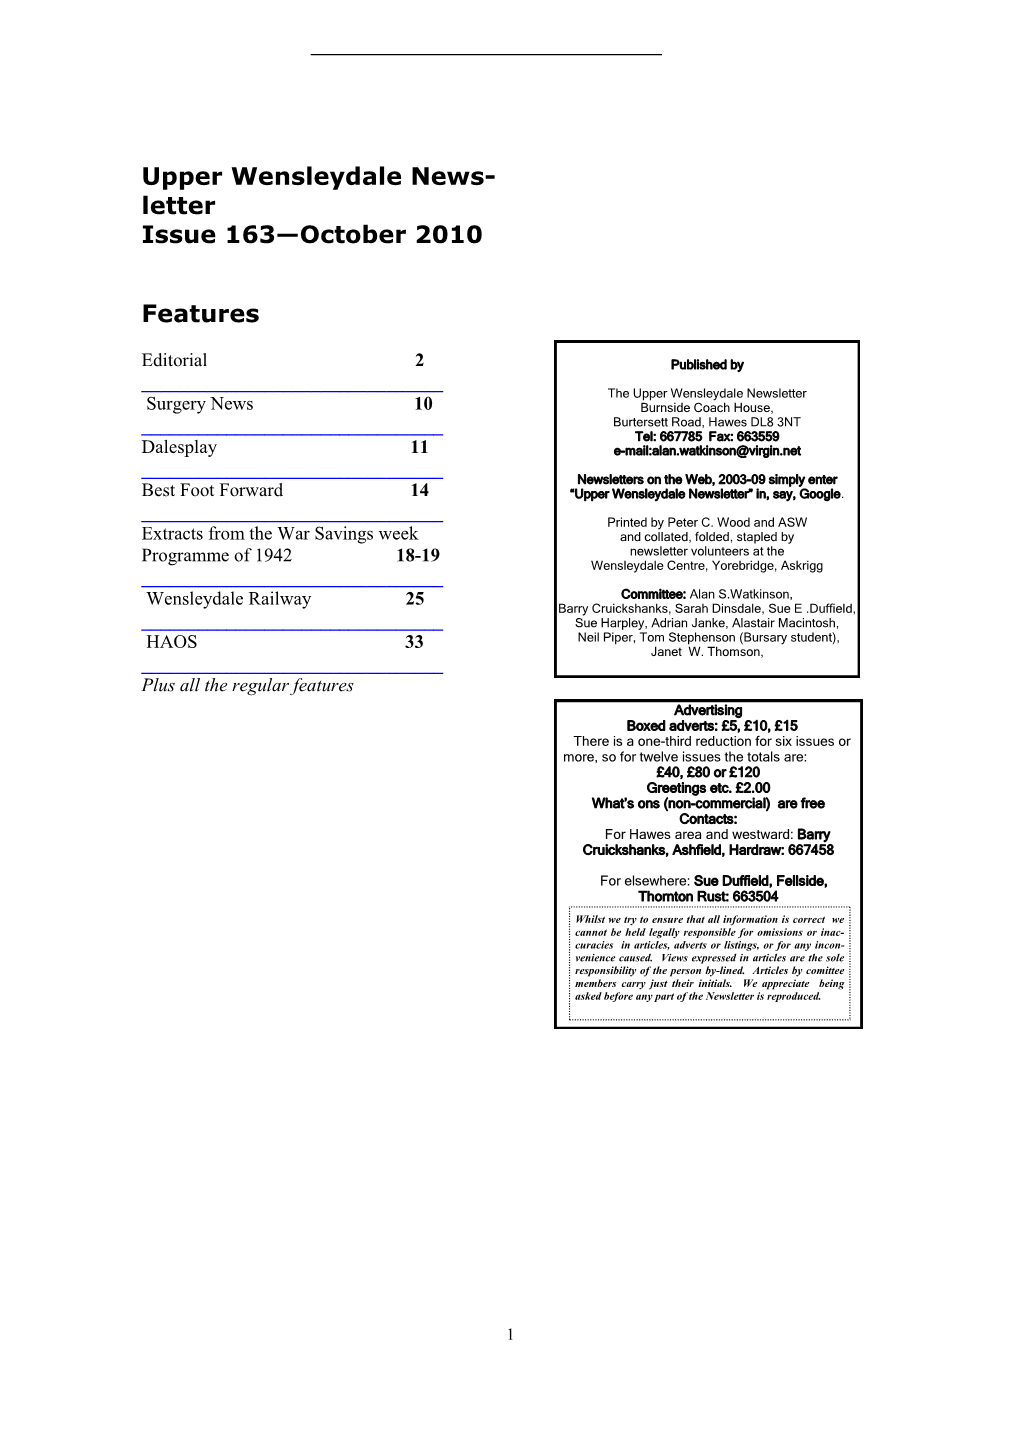 Upper Wensleydale News- Letter Issue 163—October 2010 Features